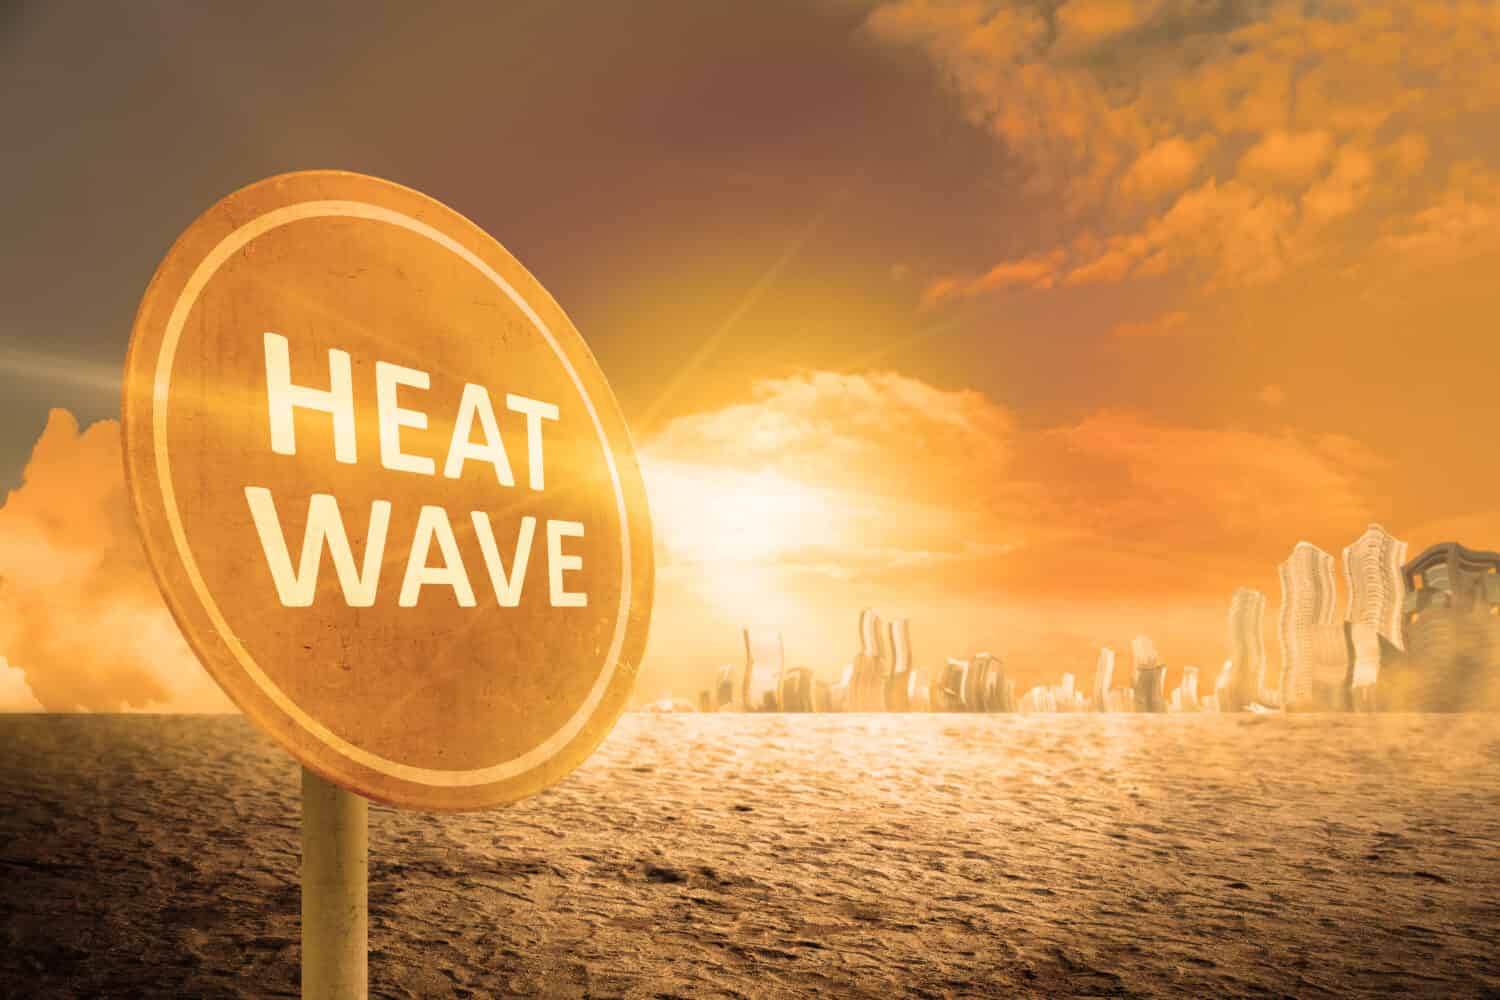 Heat wave sign on the city. Heat wave concept